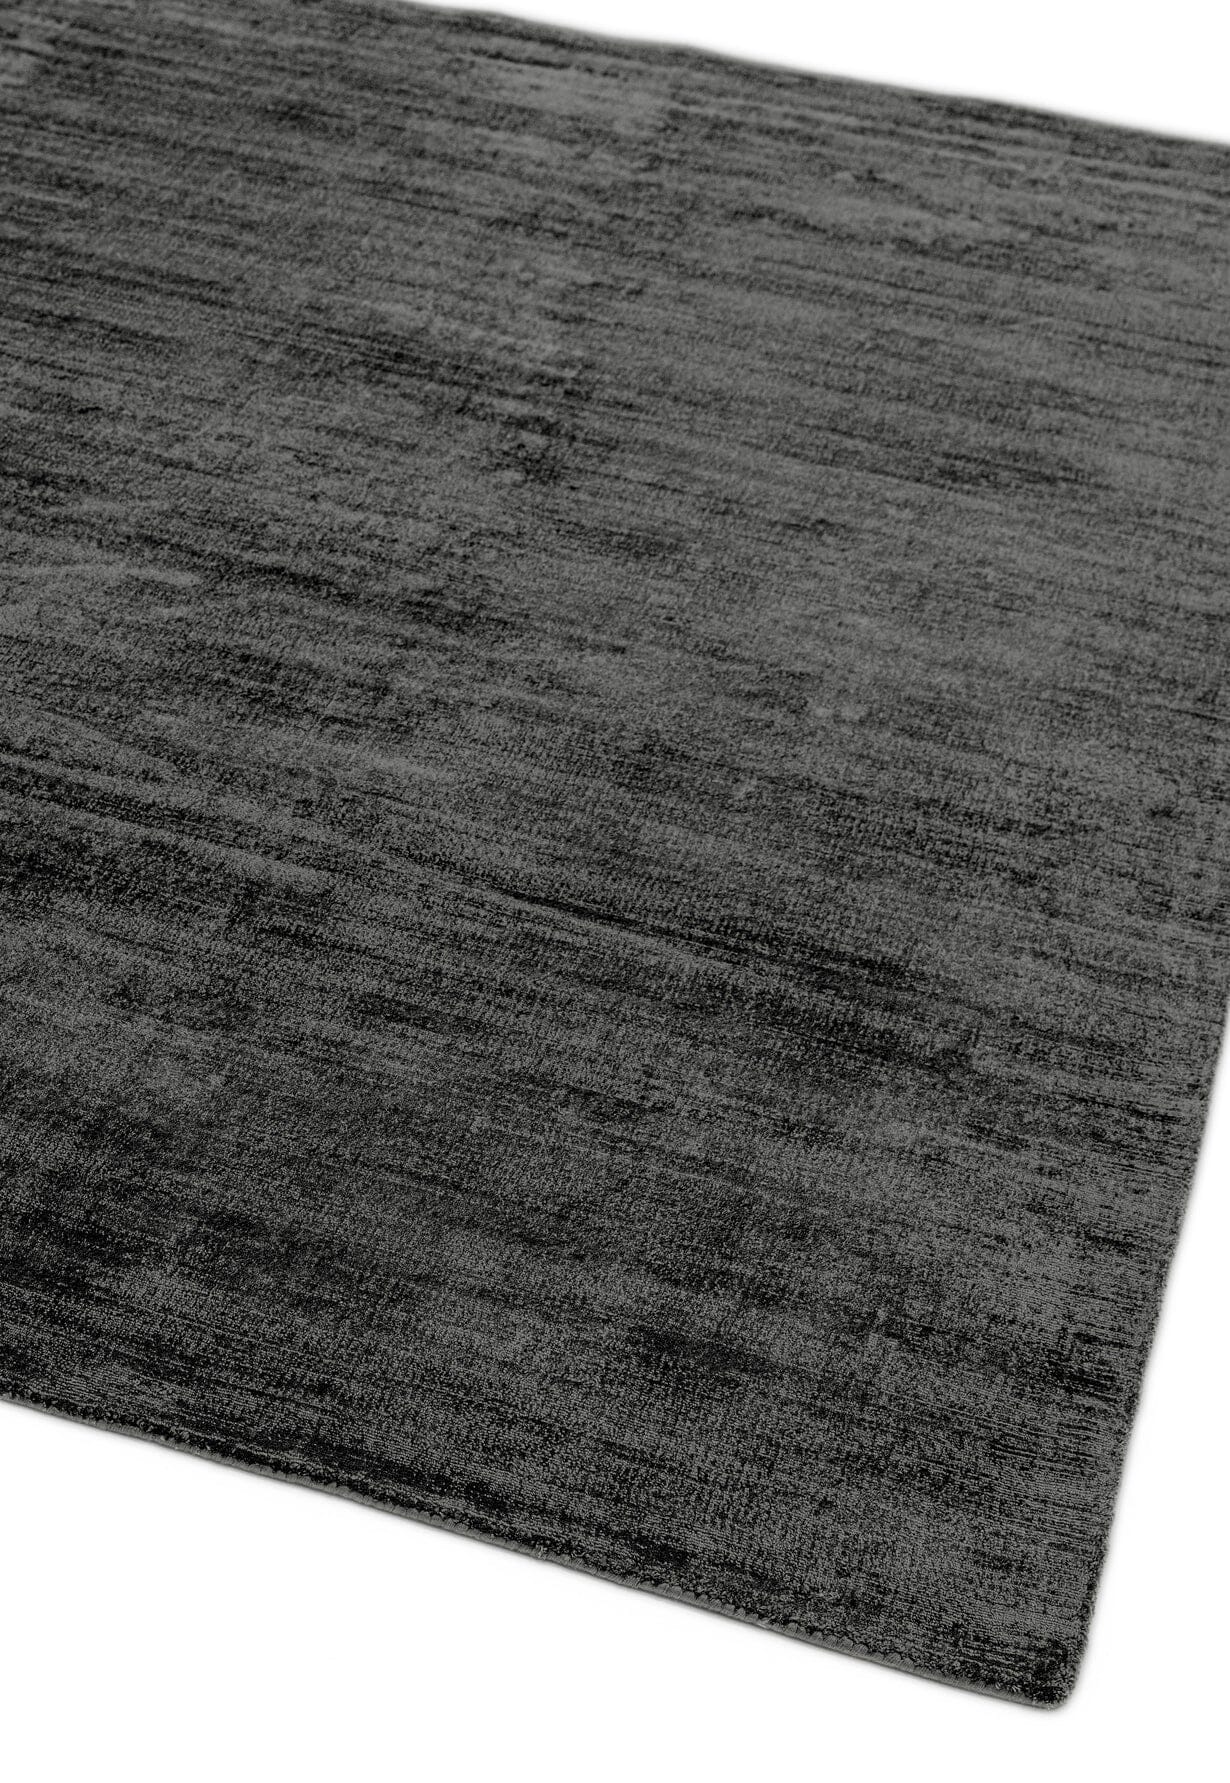  Asiatic Carpets-Asiatic Carpets Blade Hand Woven Rug Charcoal - 160 x 230cm-Grey, Silver 013 